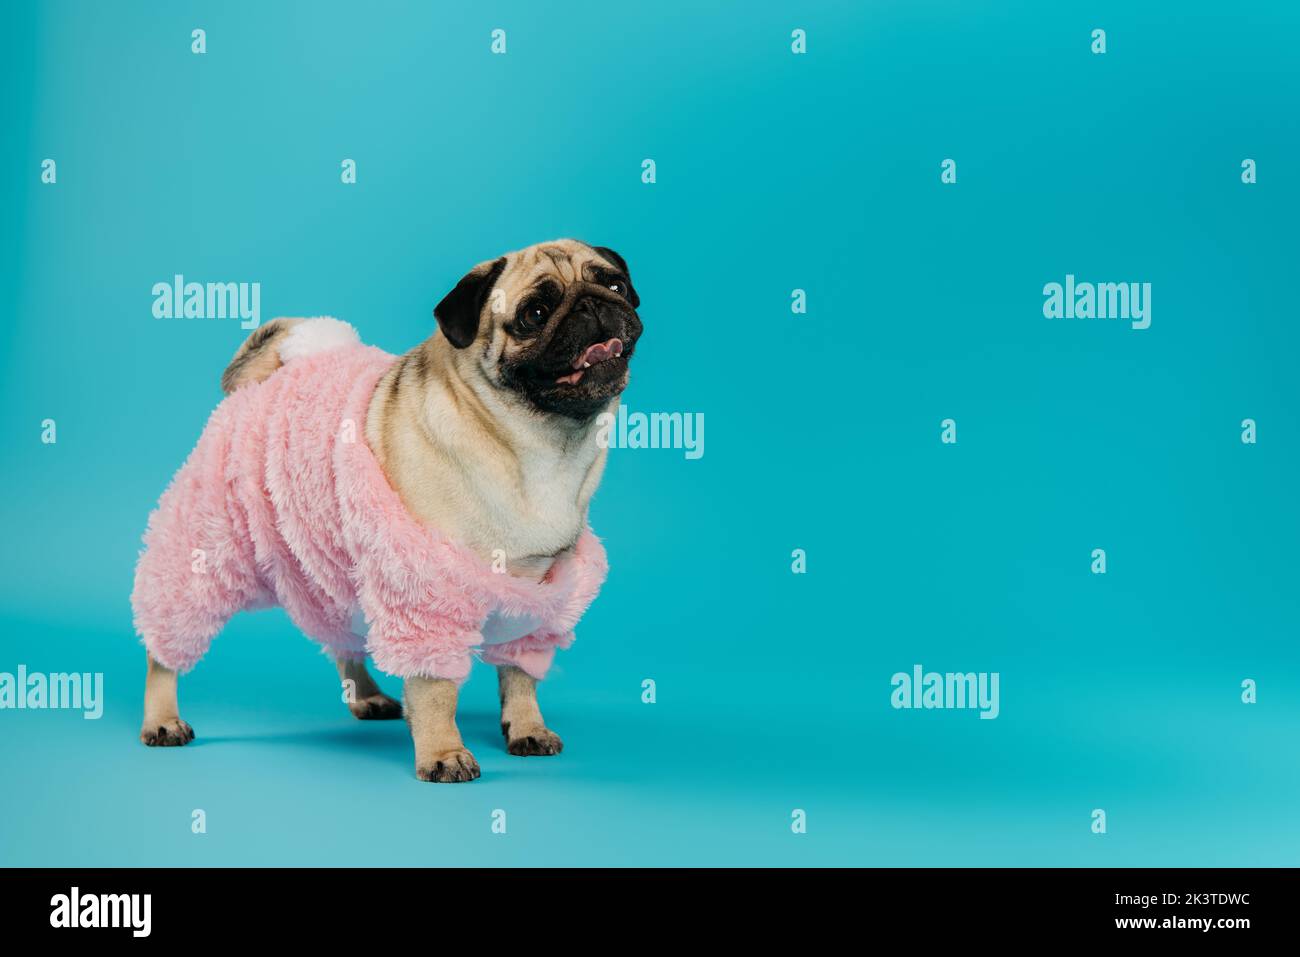 purebred pug dog in pink and fluffy pet clothes standing and sticking out tongue on blue,stock image Stock Photo